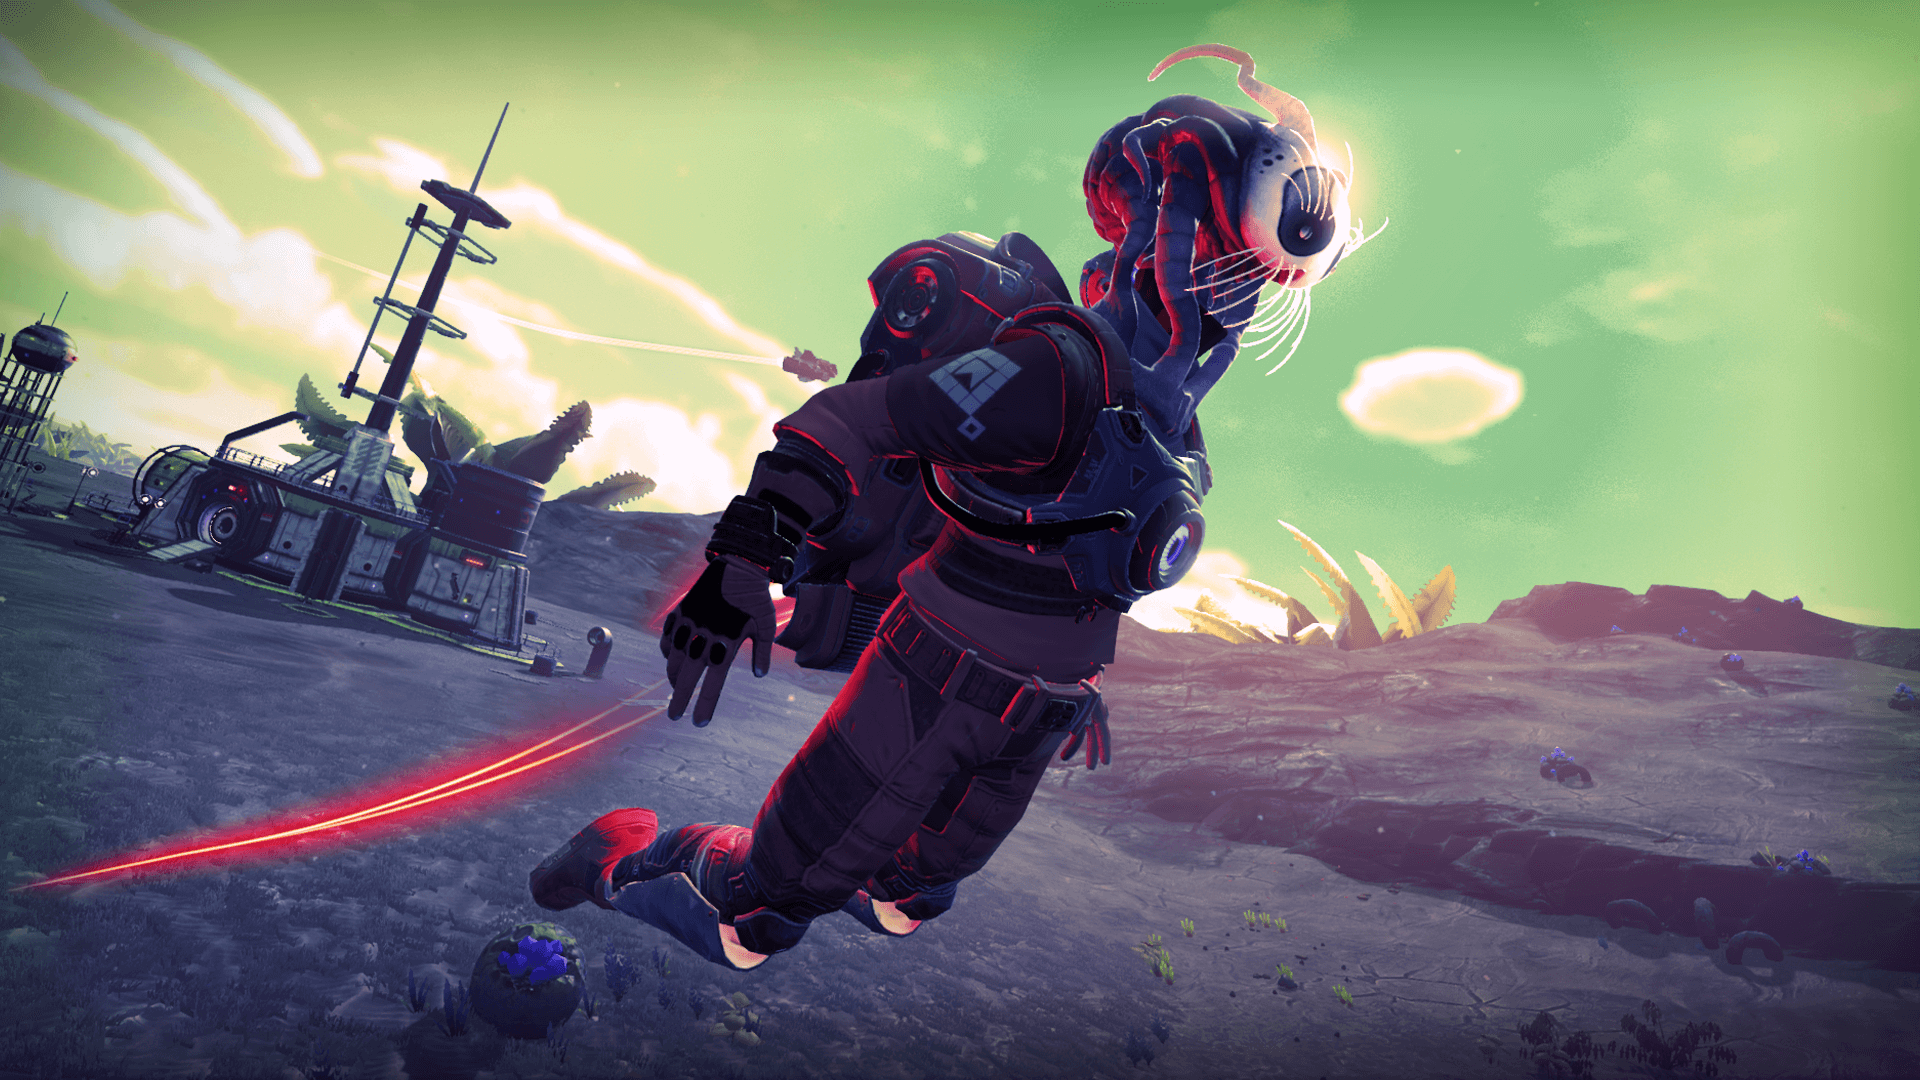 No Mans Sky Update Adds More Alien Heads, Colored Jetpack Trails